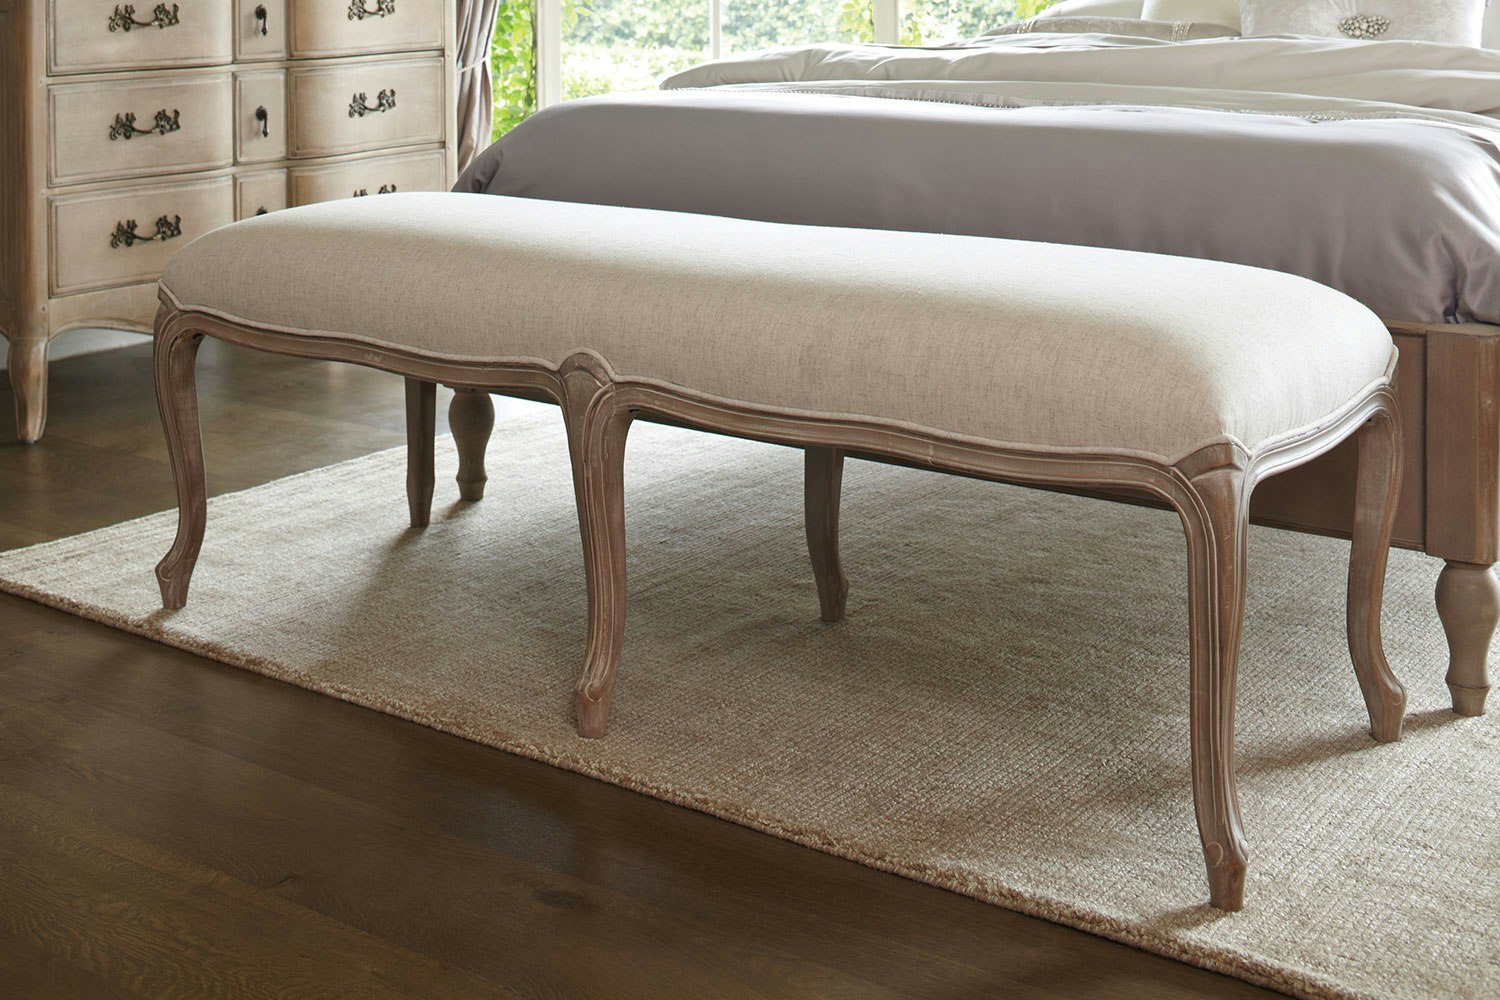 Https Wwwharveynormanconz Bedding Bedroom Furniture Bedroom Chairs And Ottomans Adele Bed End Bench By Vivinhtml